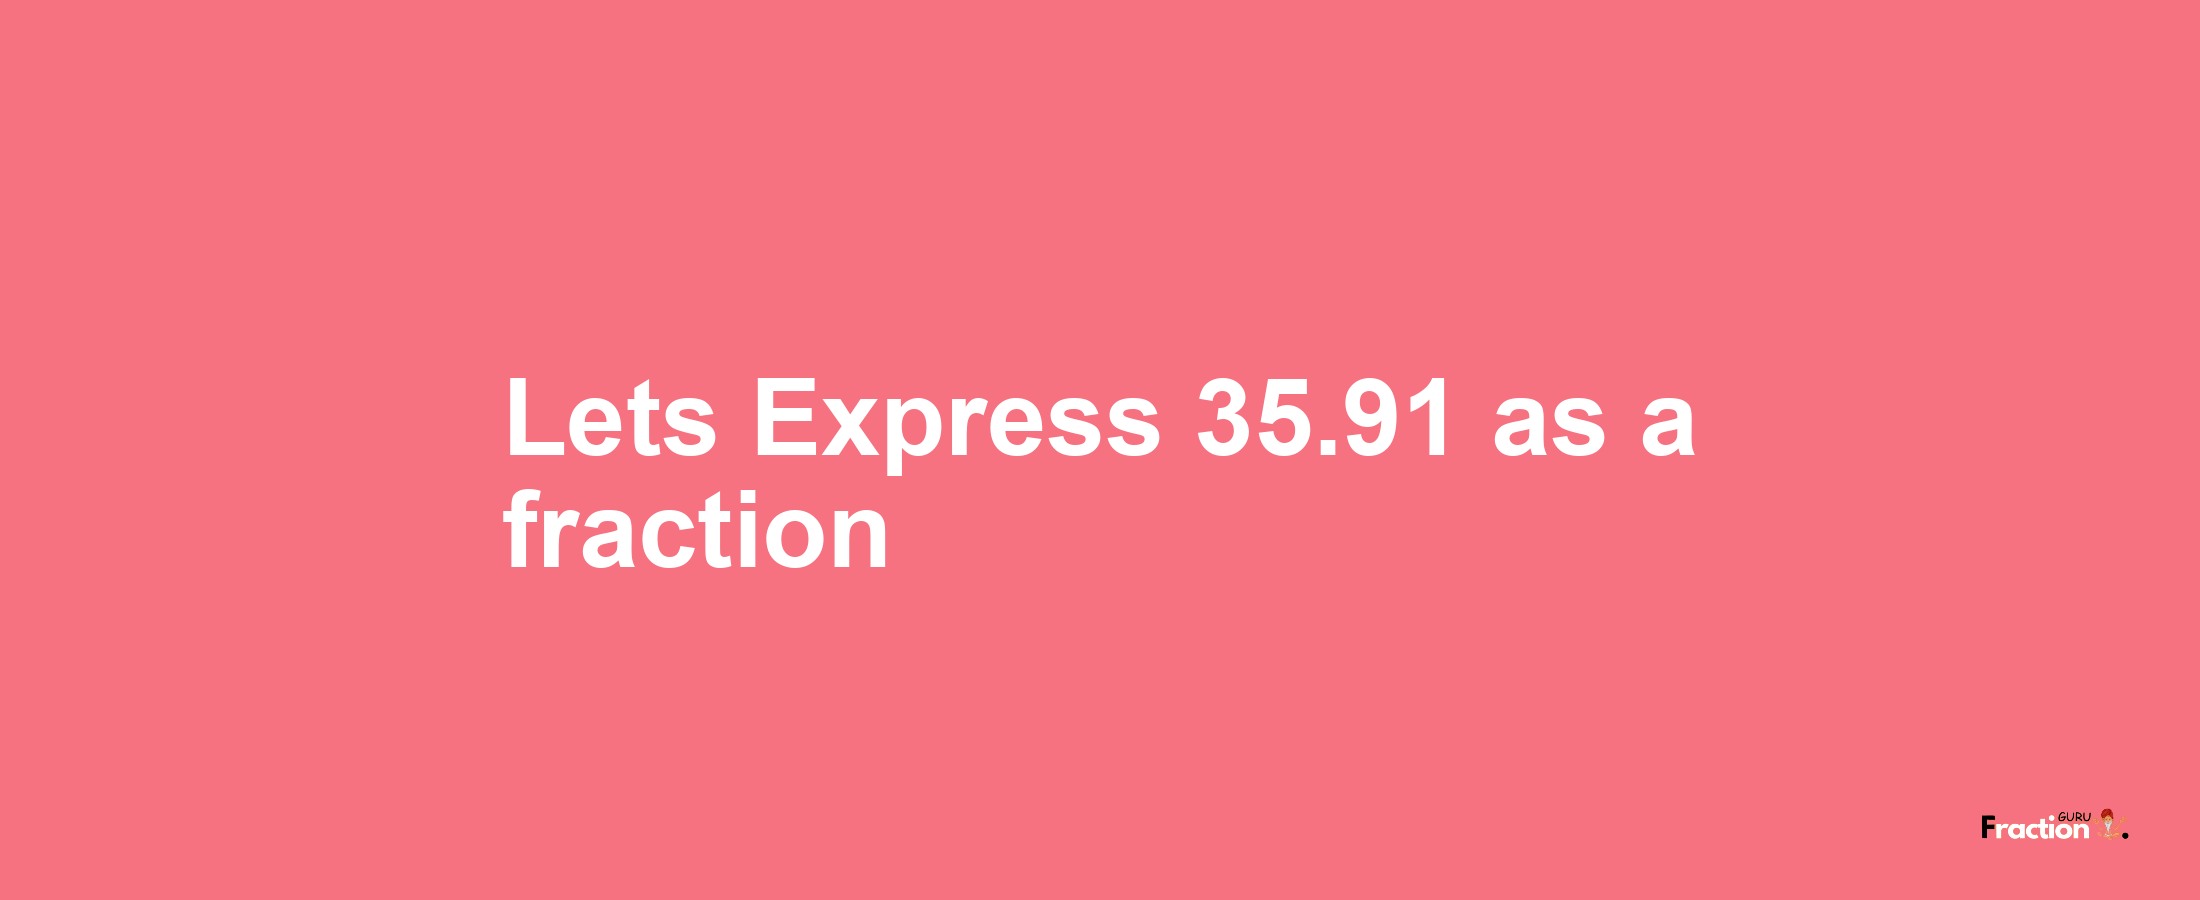 Lets Express 35.91 as afraction